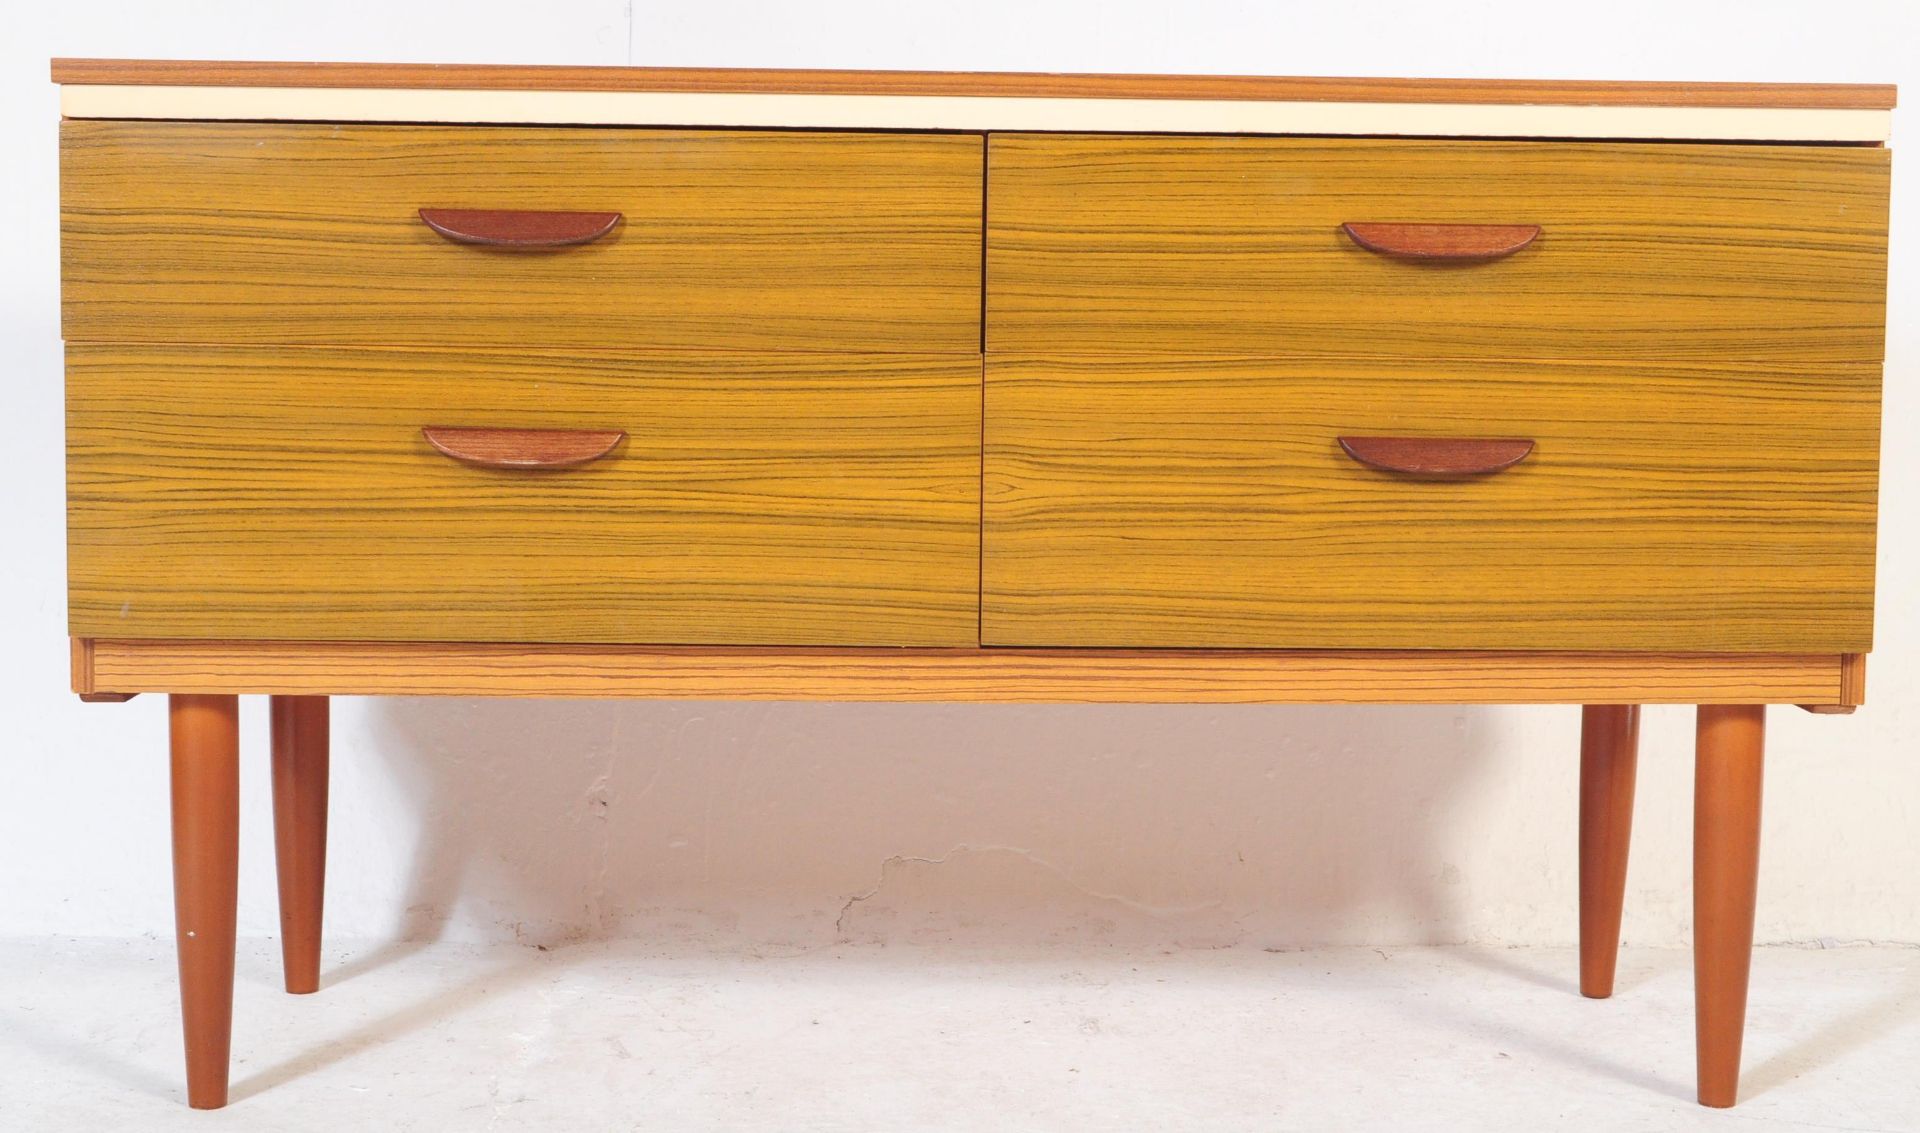 RETRO MID CENTURY 1960S FORMICA SIDEBOARD - Image 3 of 5